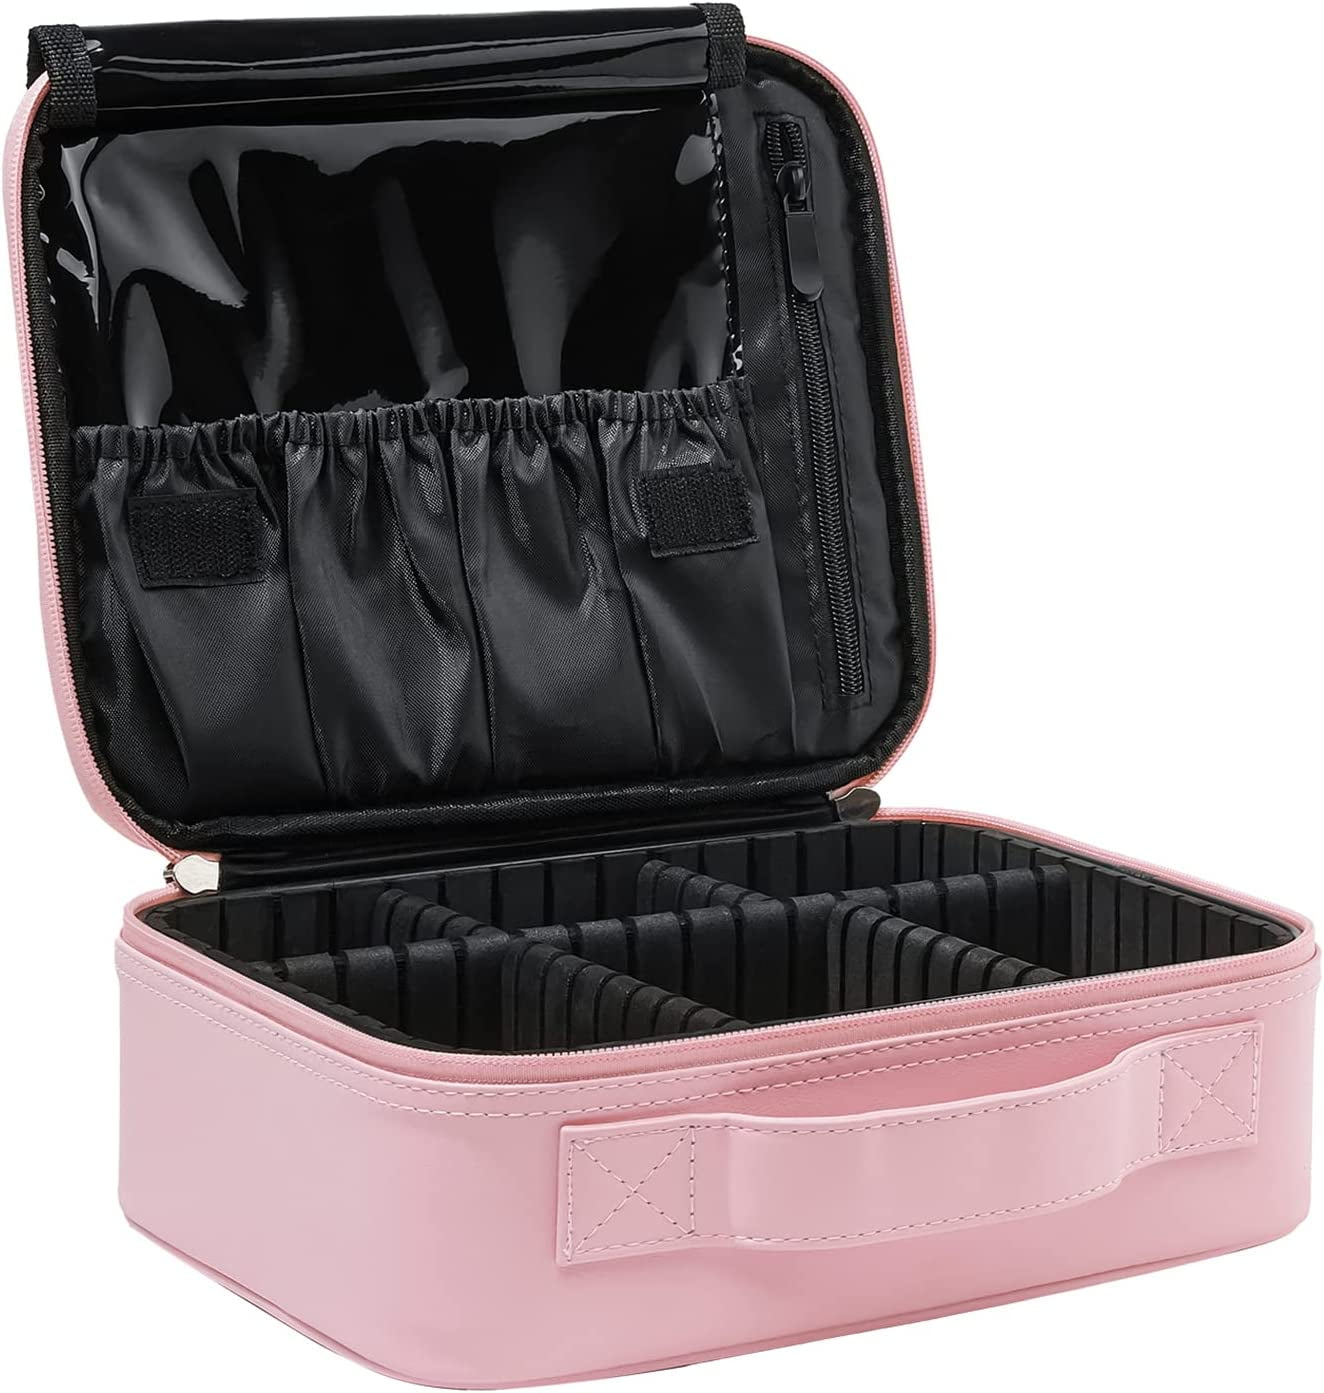 Amazon.com: Bvser Travel Makeup Case, PU Leather Portable Organizer Makeup  Train Case Makeup Bag Cosmetic Case with Adjustable Dividers for Cosmetics  Makeup Brushes Women (Pink) : Beauty & Personal Care